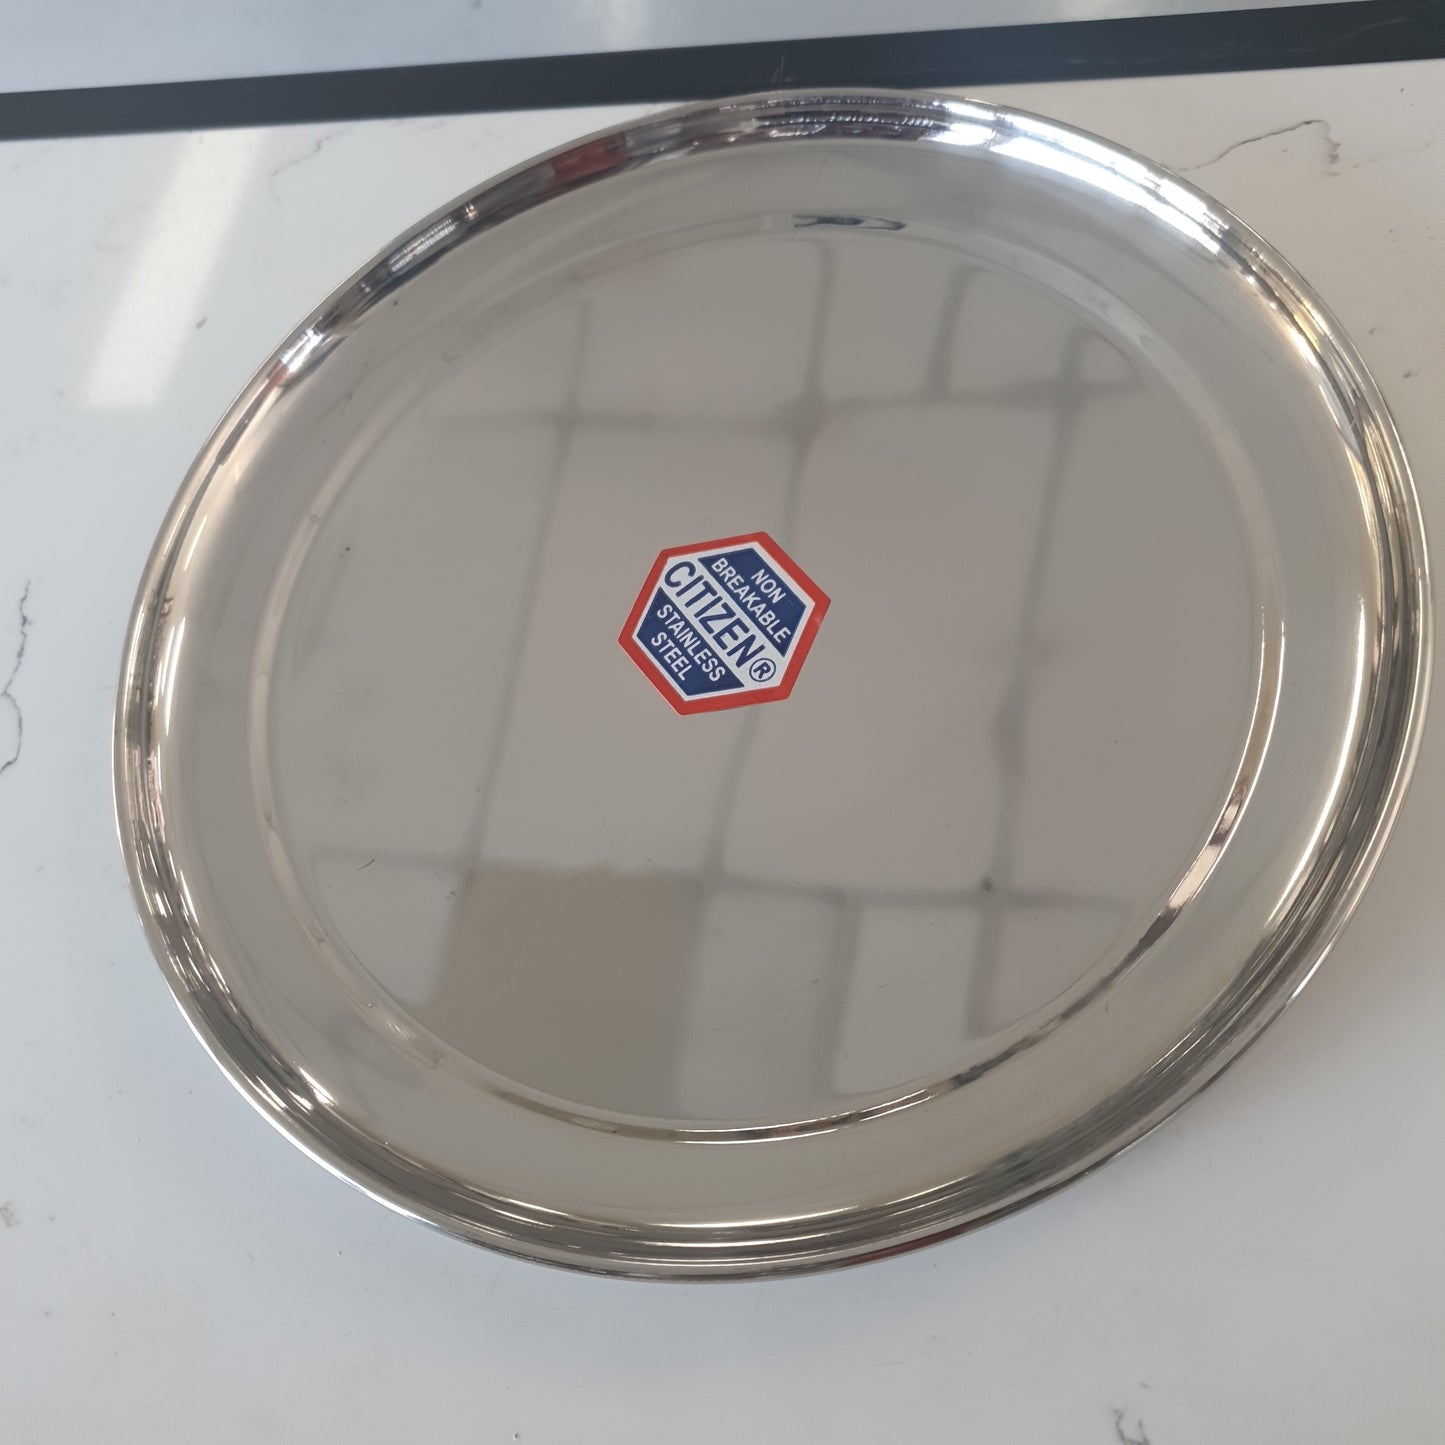 Stainless Steel Shiny Round Plate- 10"